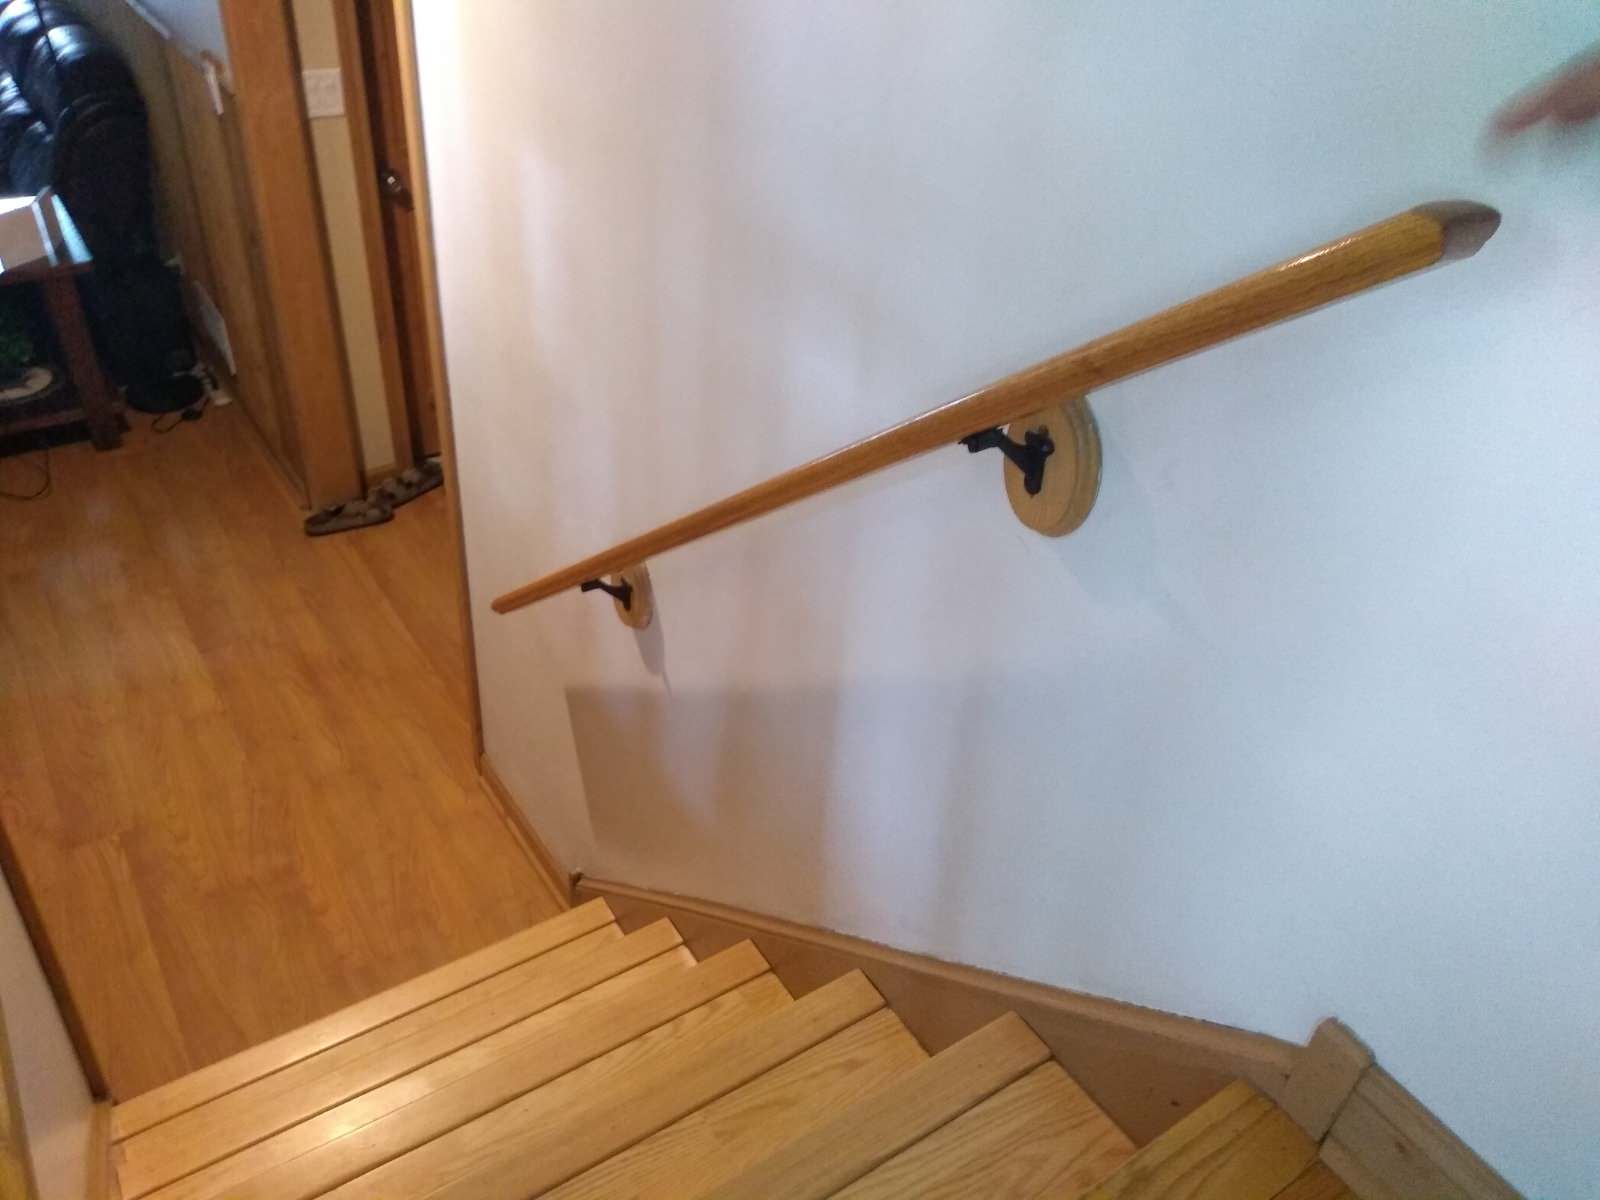 BEFORE old laminate steps